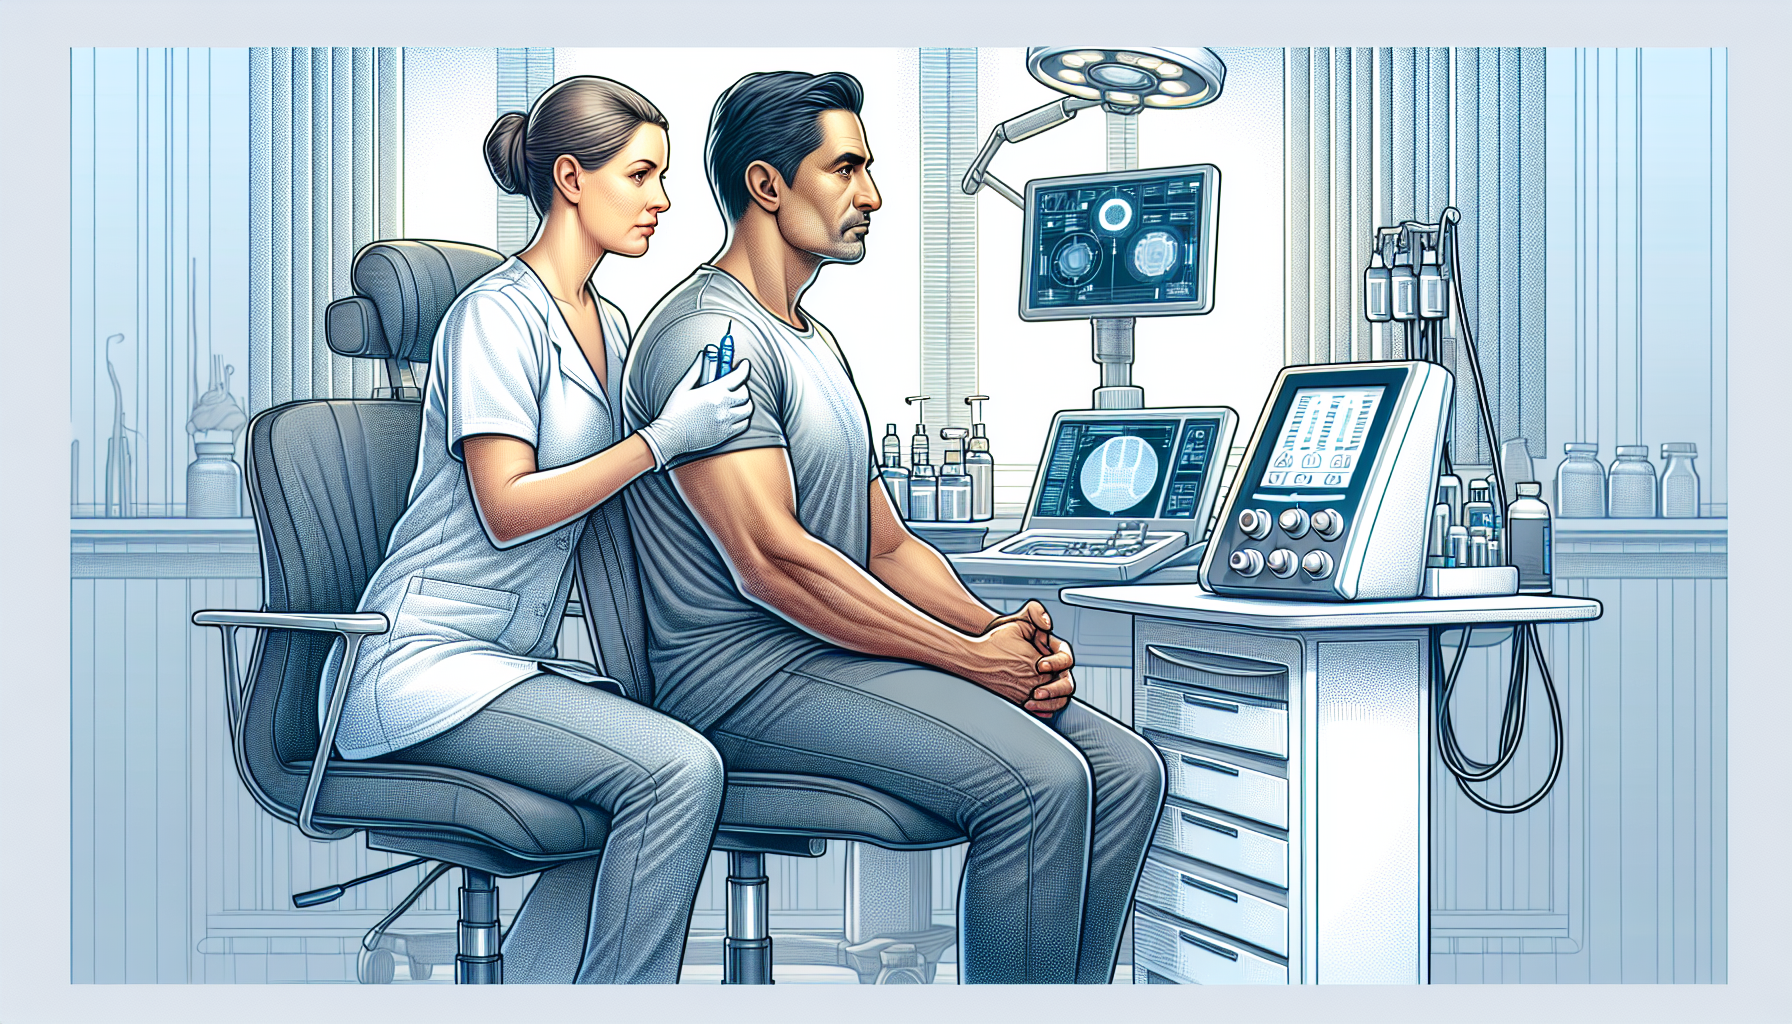 Illustration of a man receiving testosterone replacement therapy